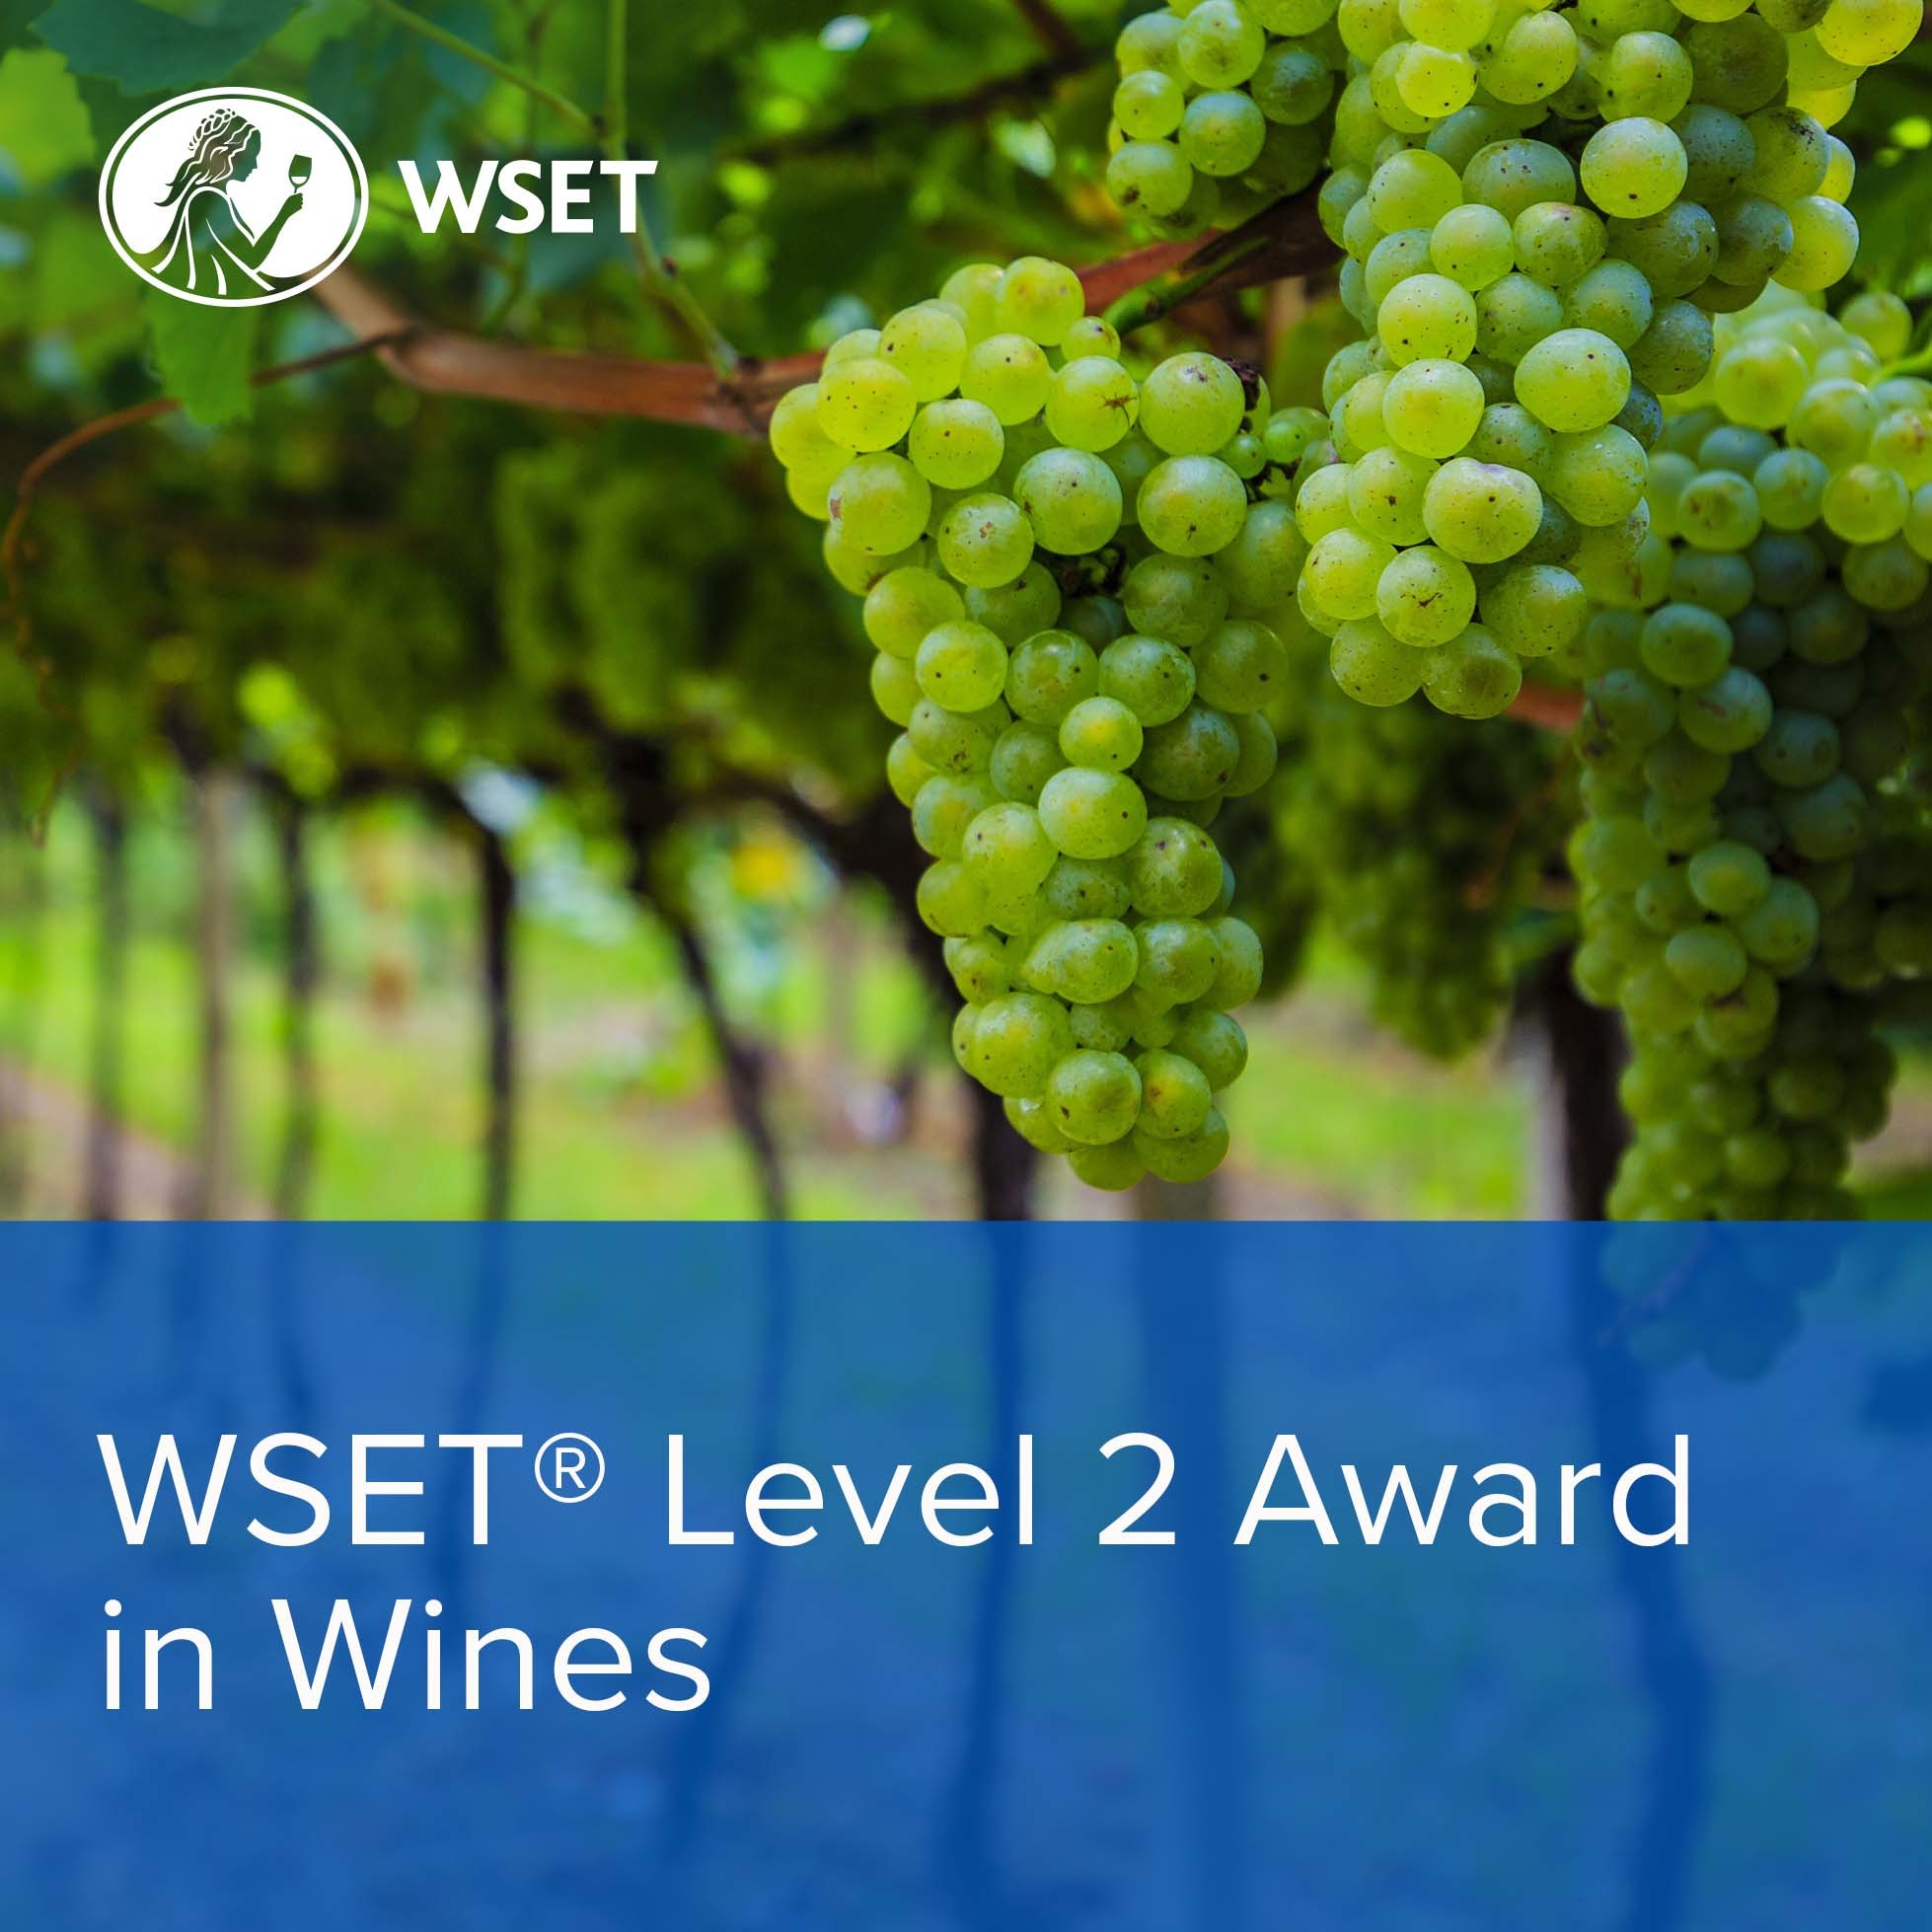  WSET Level 2 Award in Wines Course: Evening Format (Classroom)  